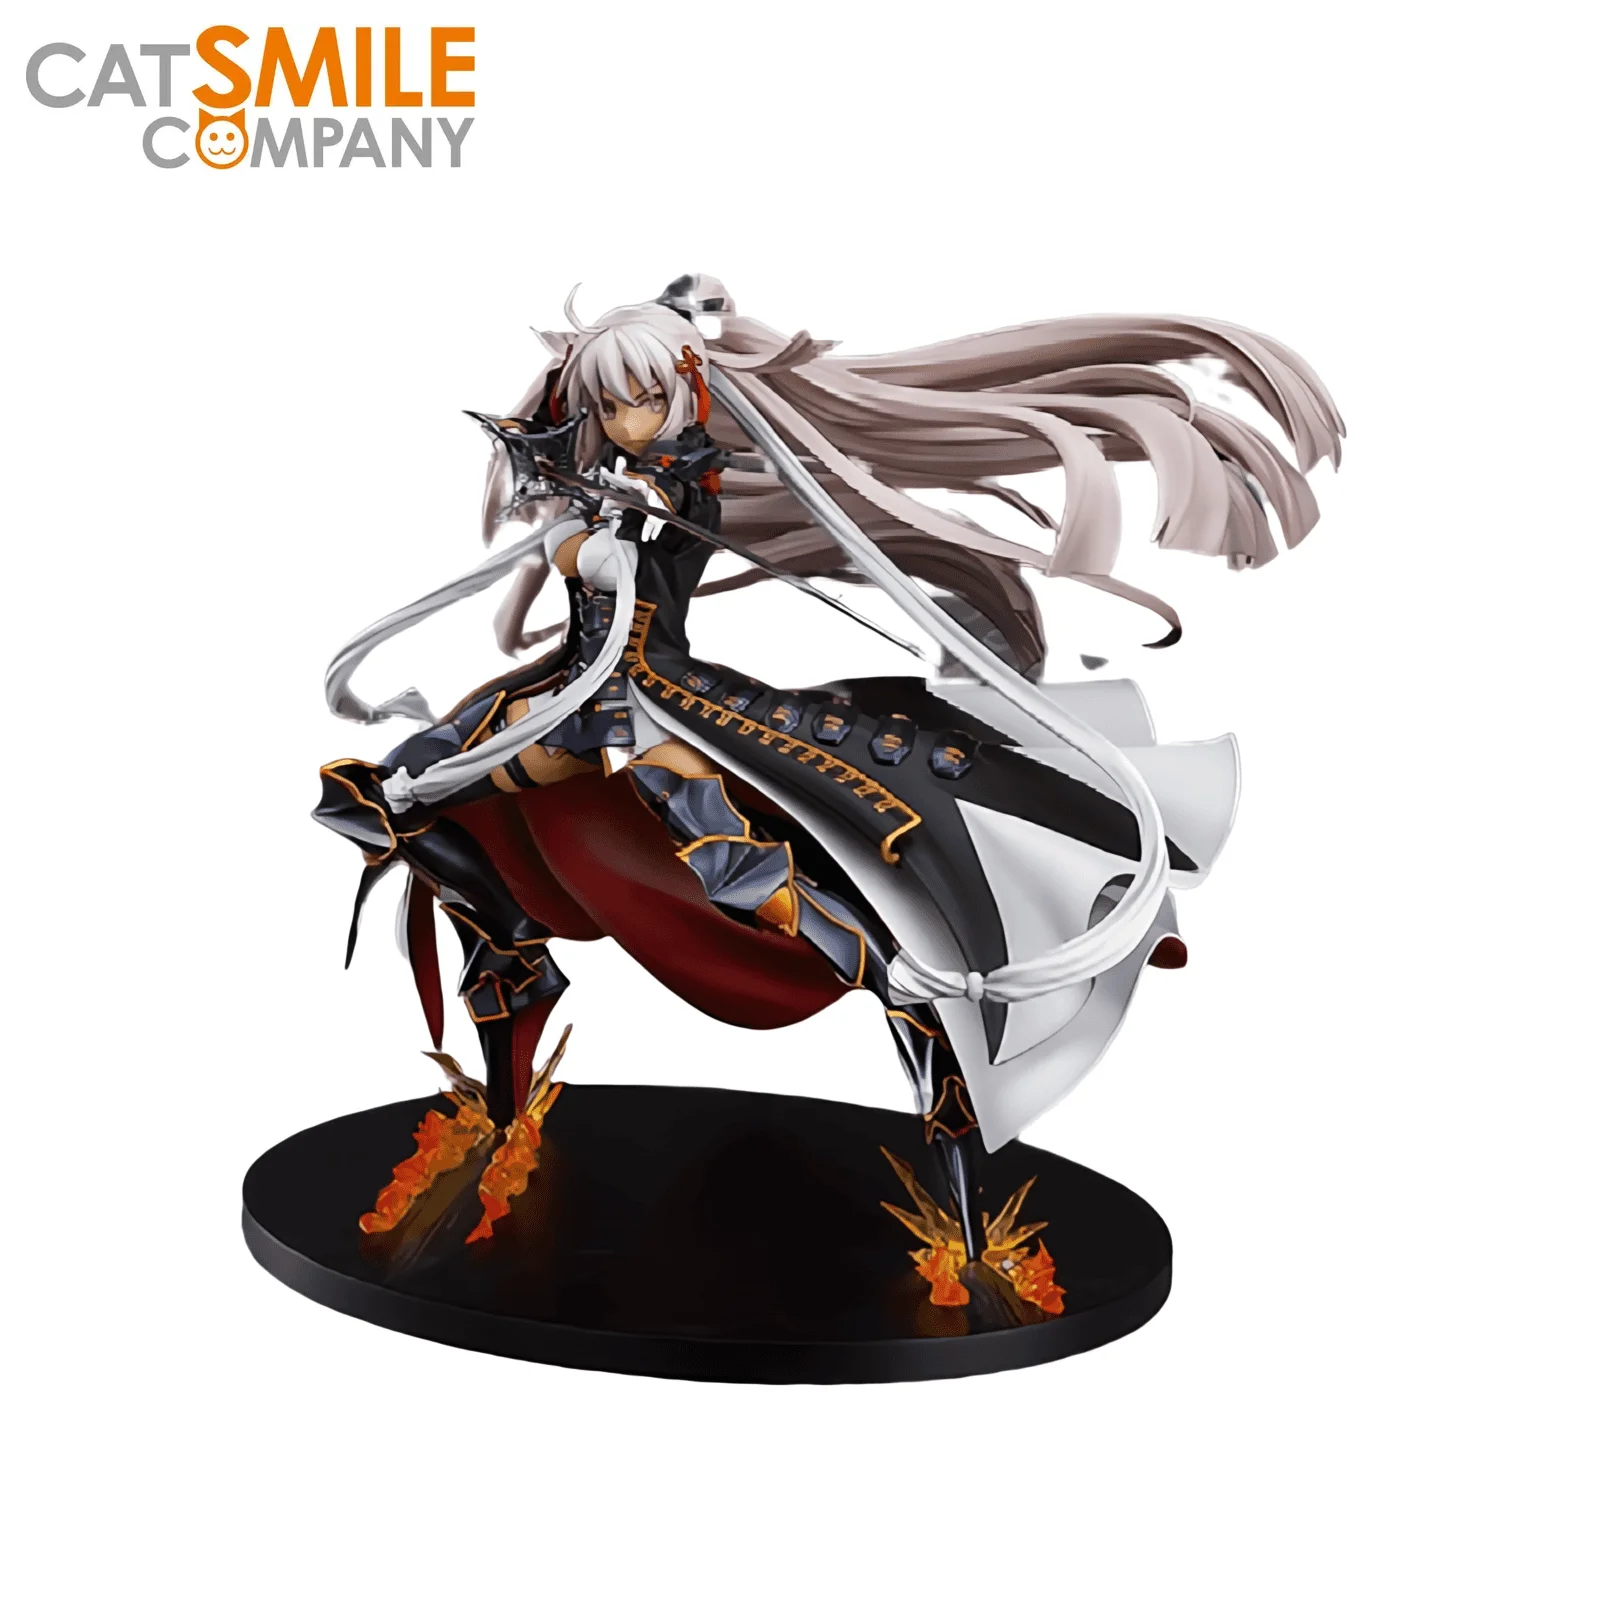 

GSC Fate/Grand Order Okita Souji Alter Third Ascension Action Figure Anime Model Desktop Decorations Collectible Toys Gifts